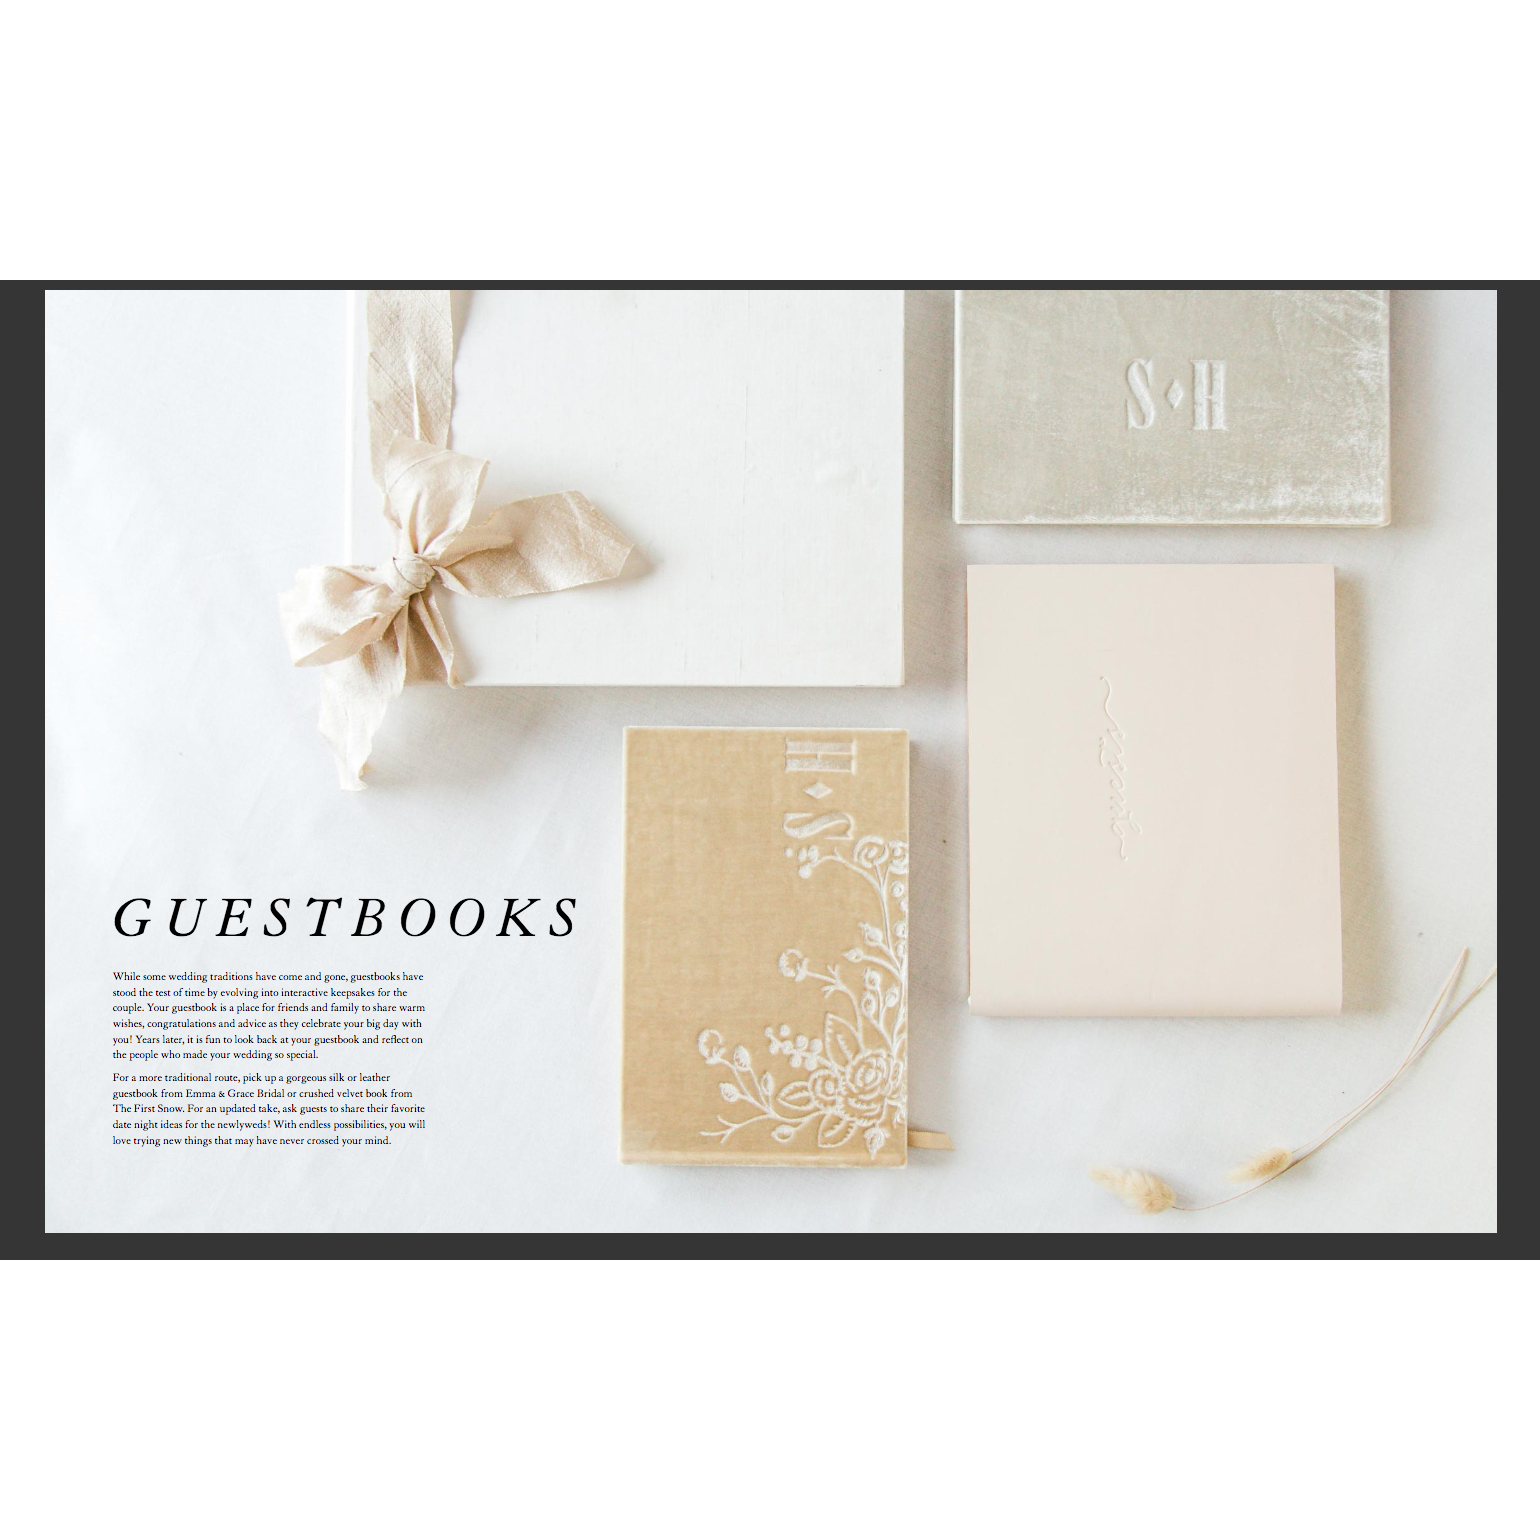 100 Page Velvet-Covered Guestbook with Custom Monogramming - The First Snow